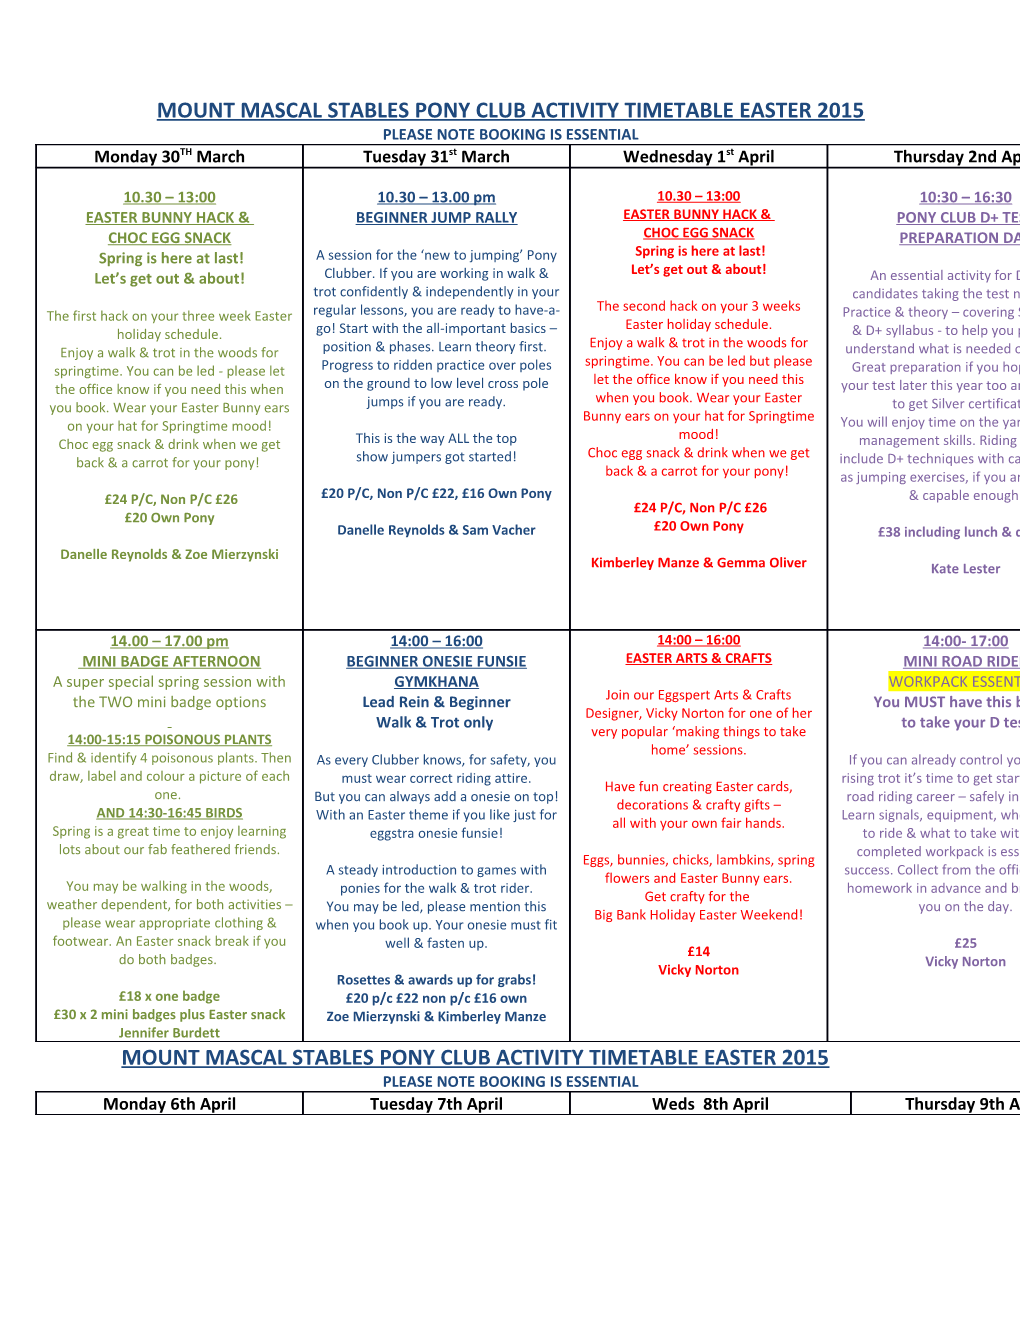 Mount Mascal Stables Pony Club Activity Timetable Easter 2015